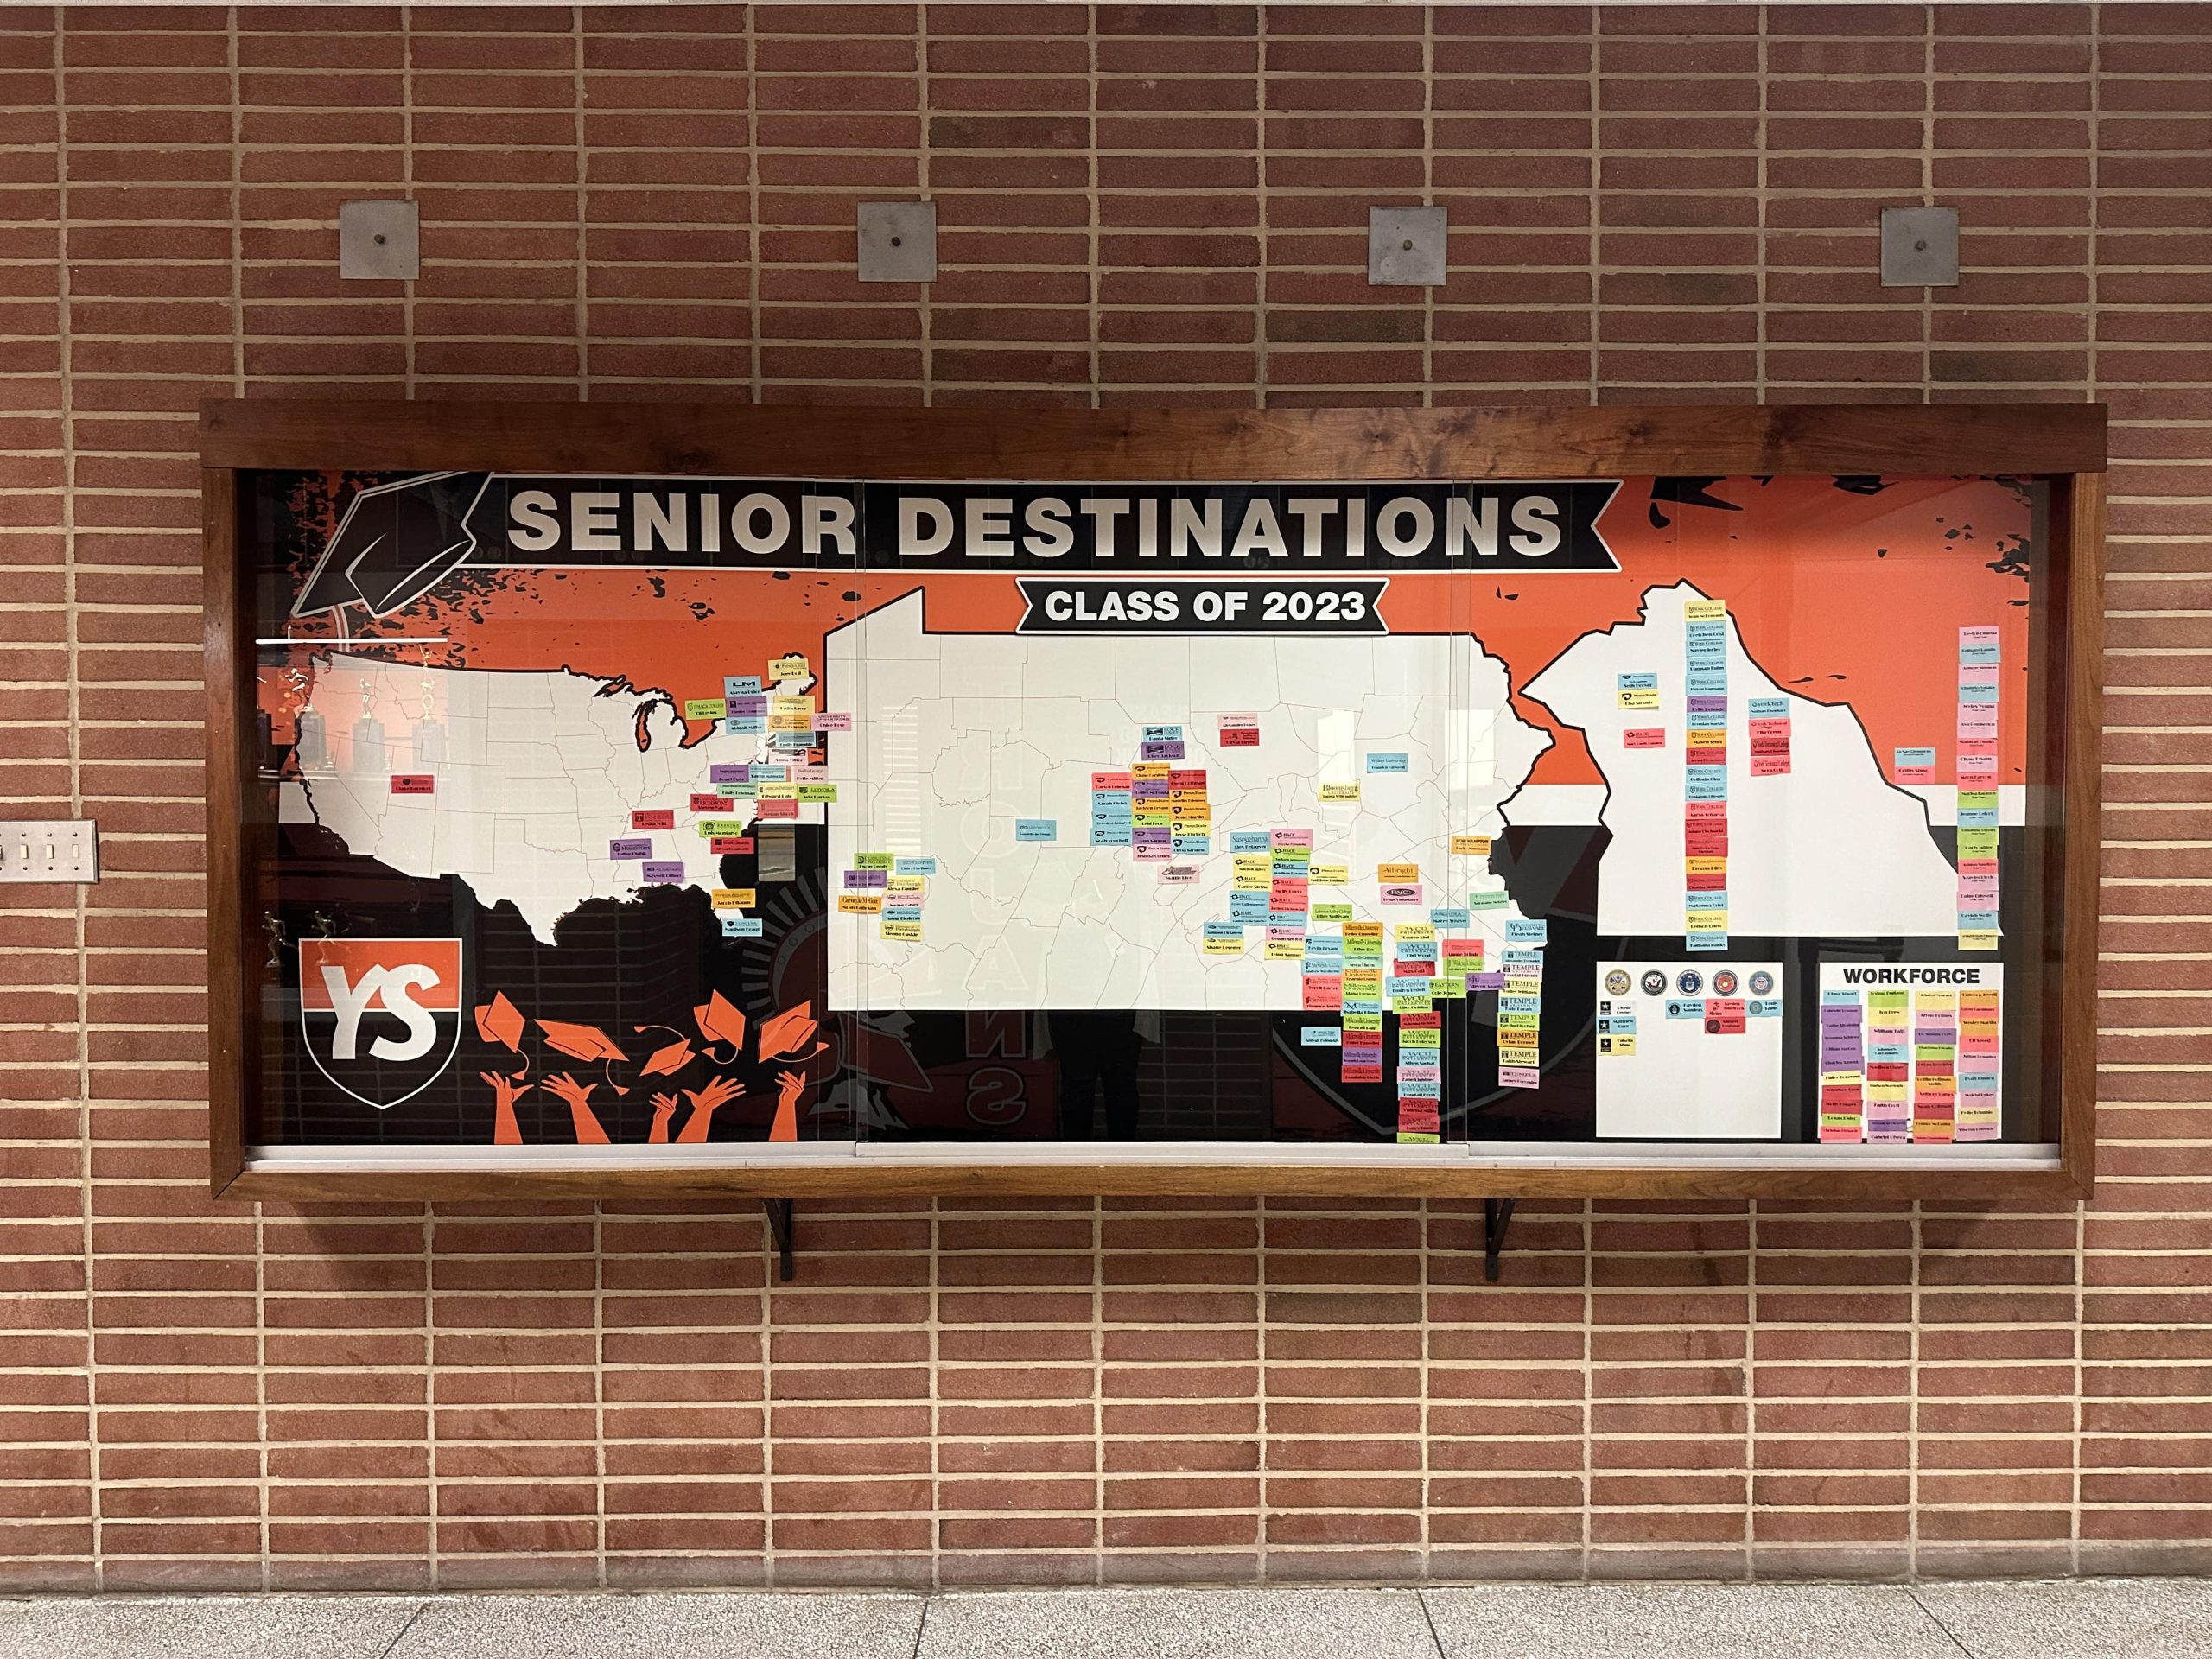 The Senior Destinations display for the Class of 2023